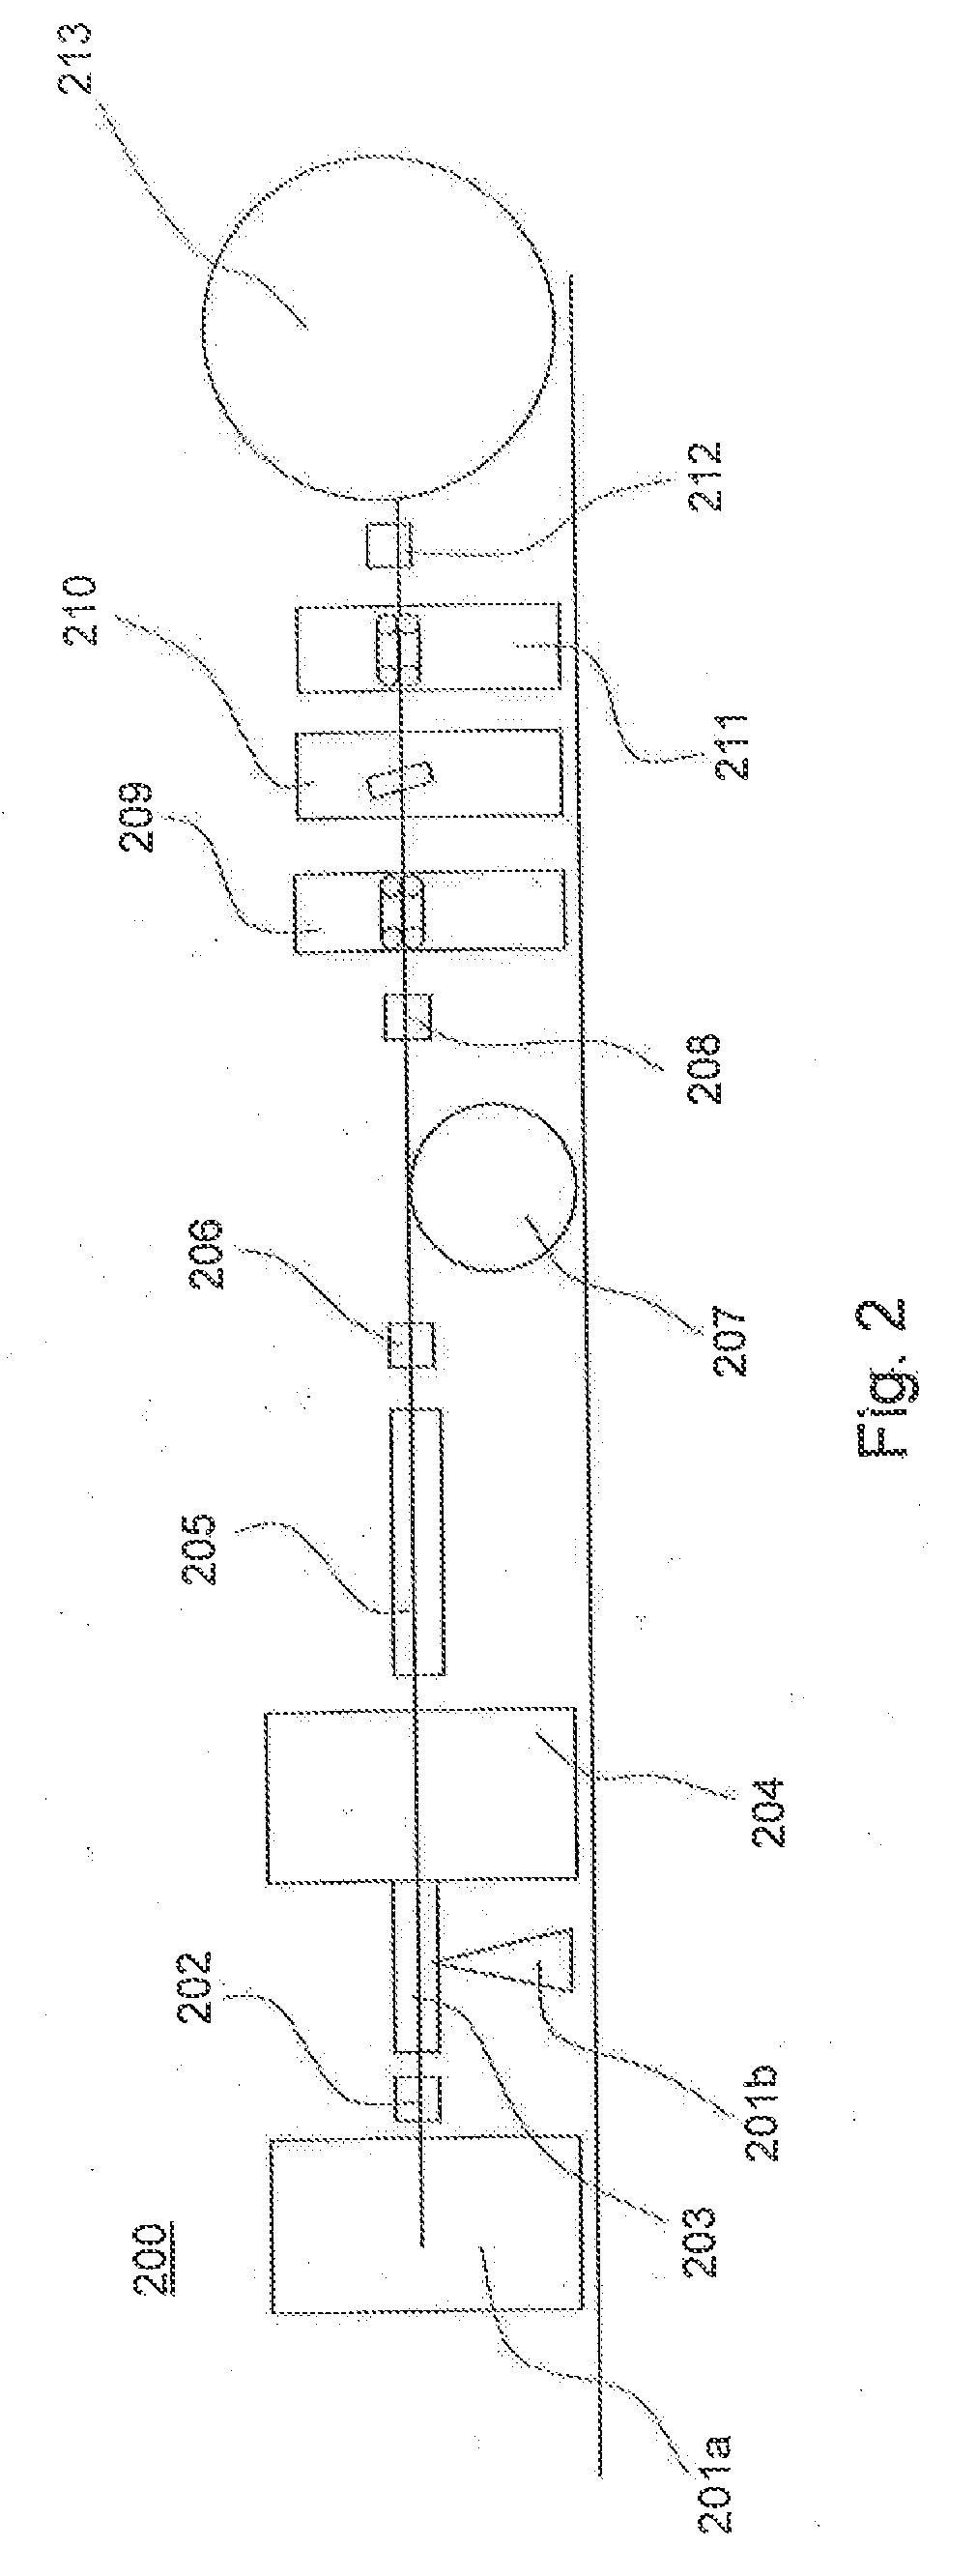 Method and Apparatus for Manufacturing an Optical Cable and Cable so Manufactured